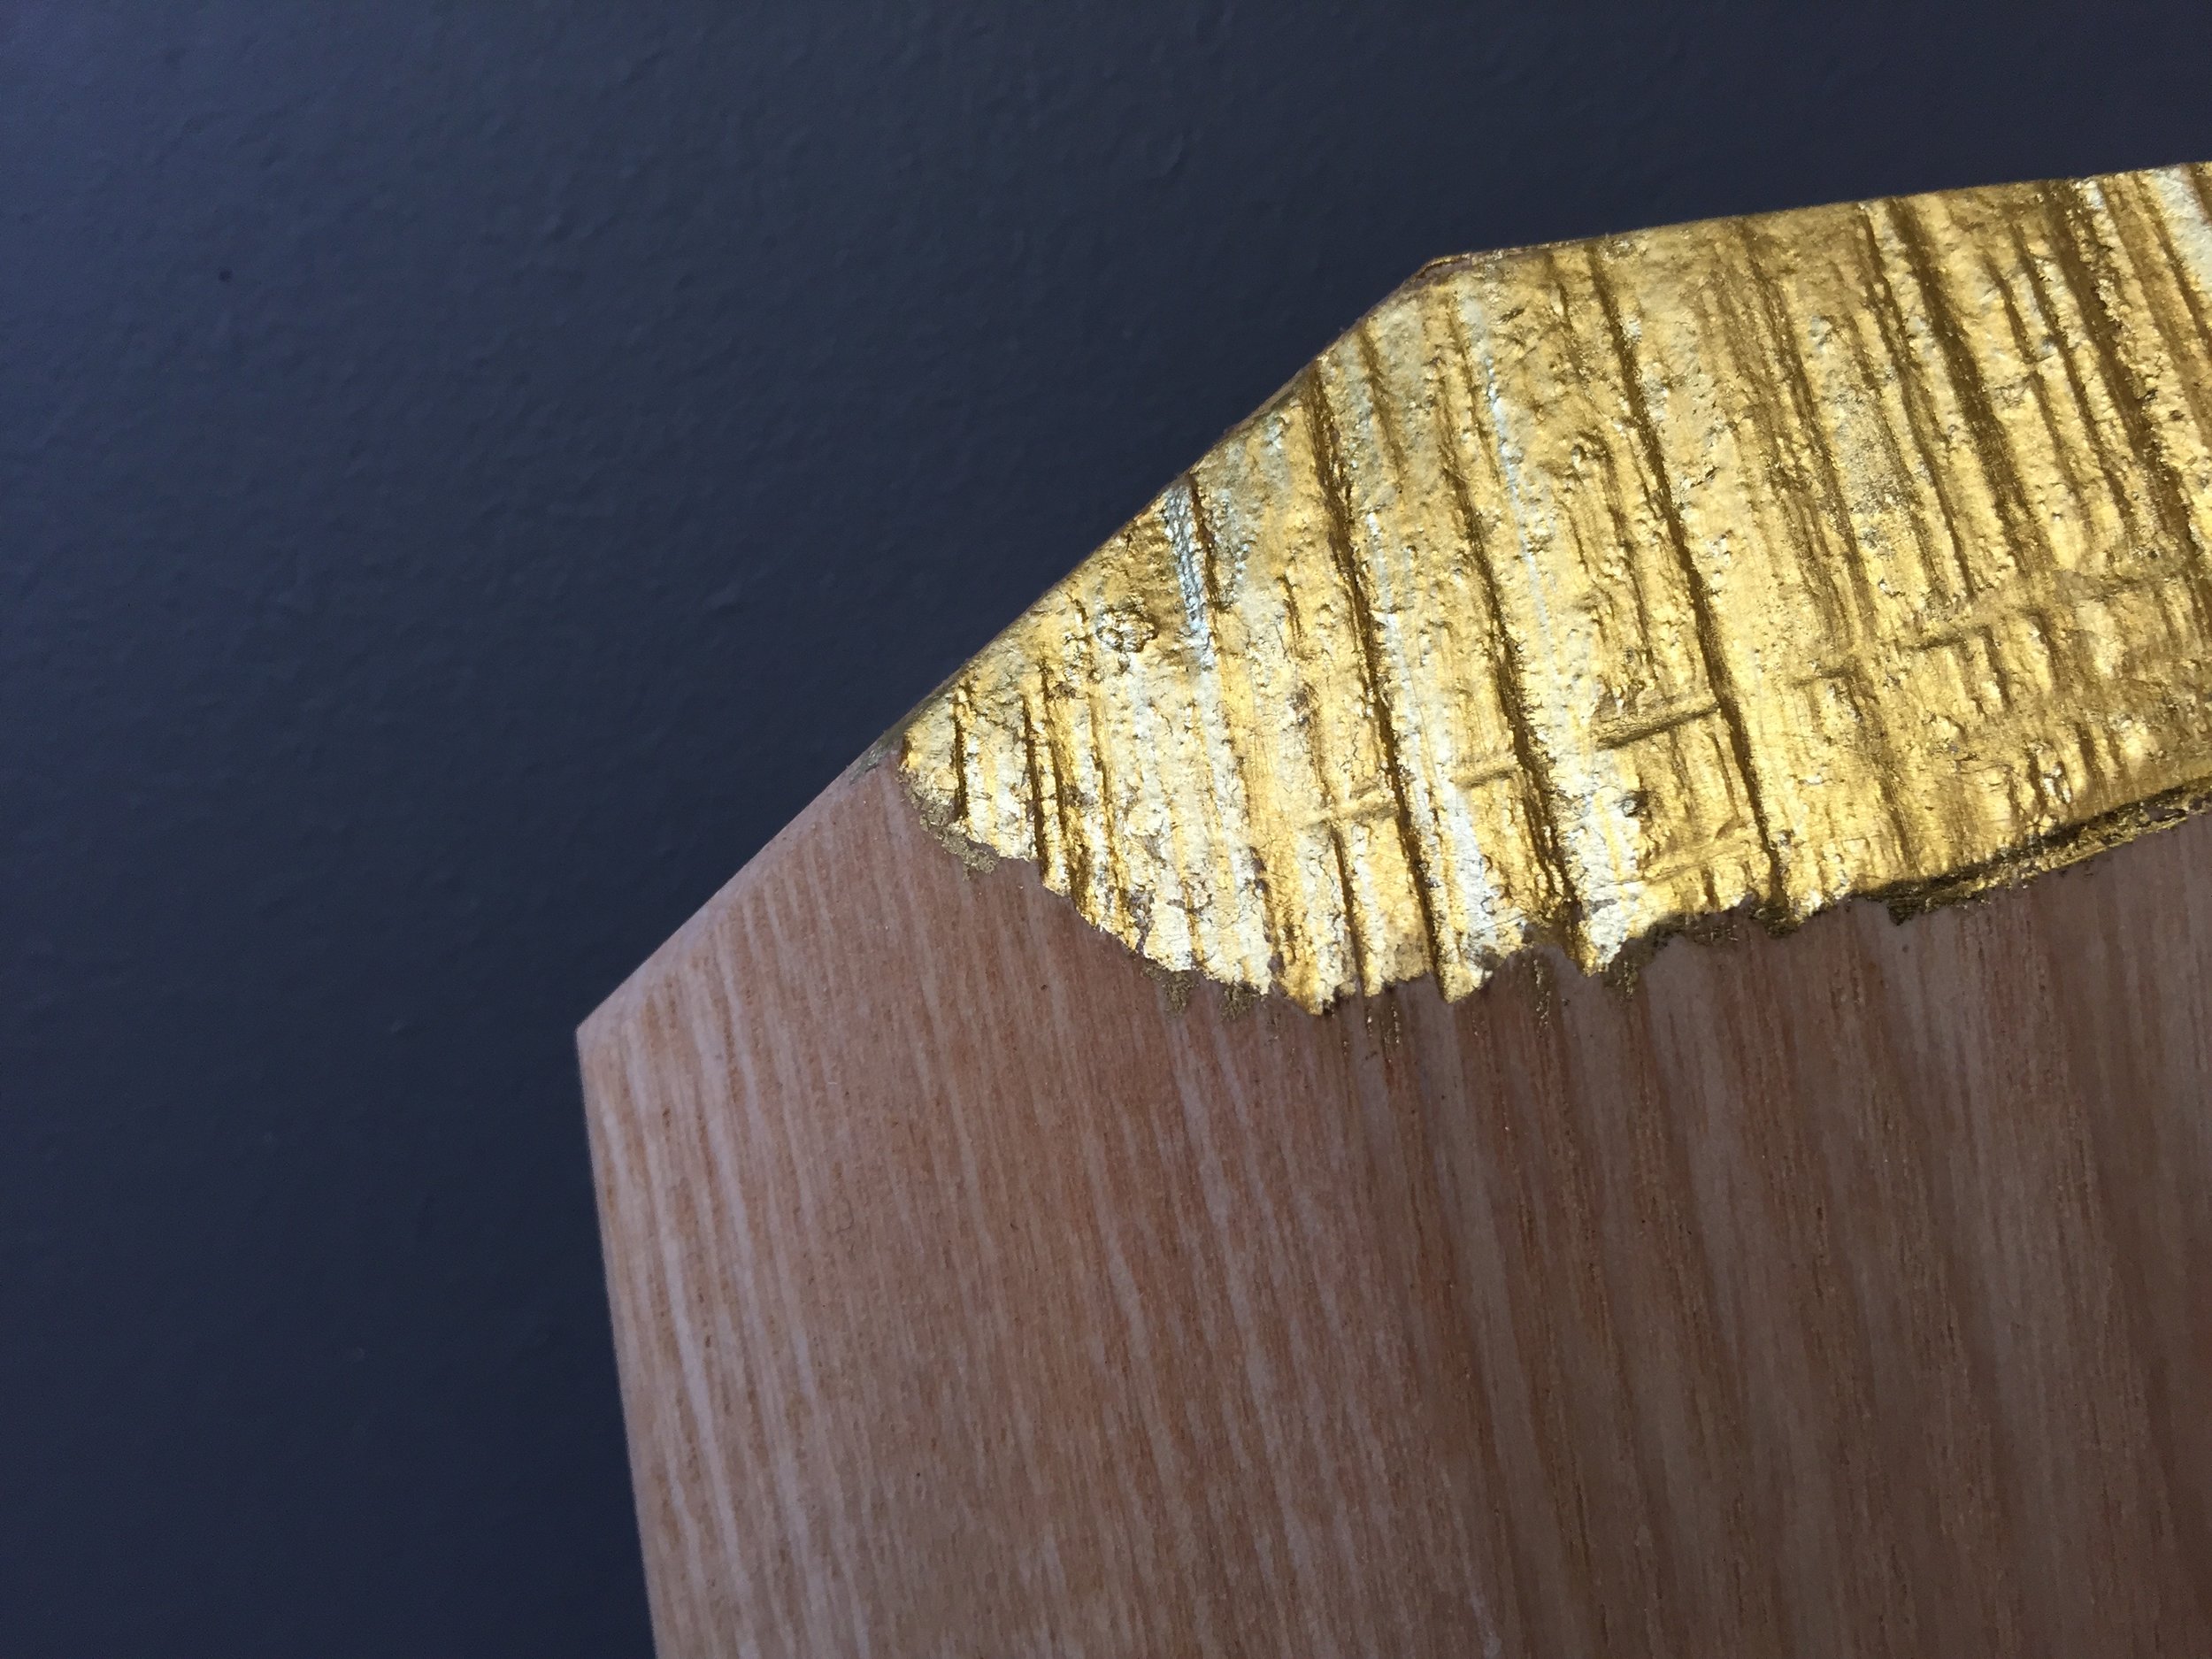  revealing a layer of 22 carat gold leaf on crafted clothes hangers